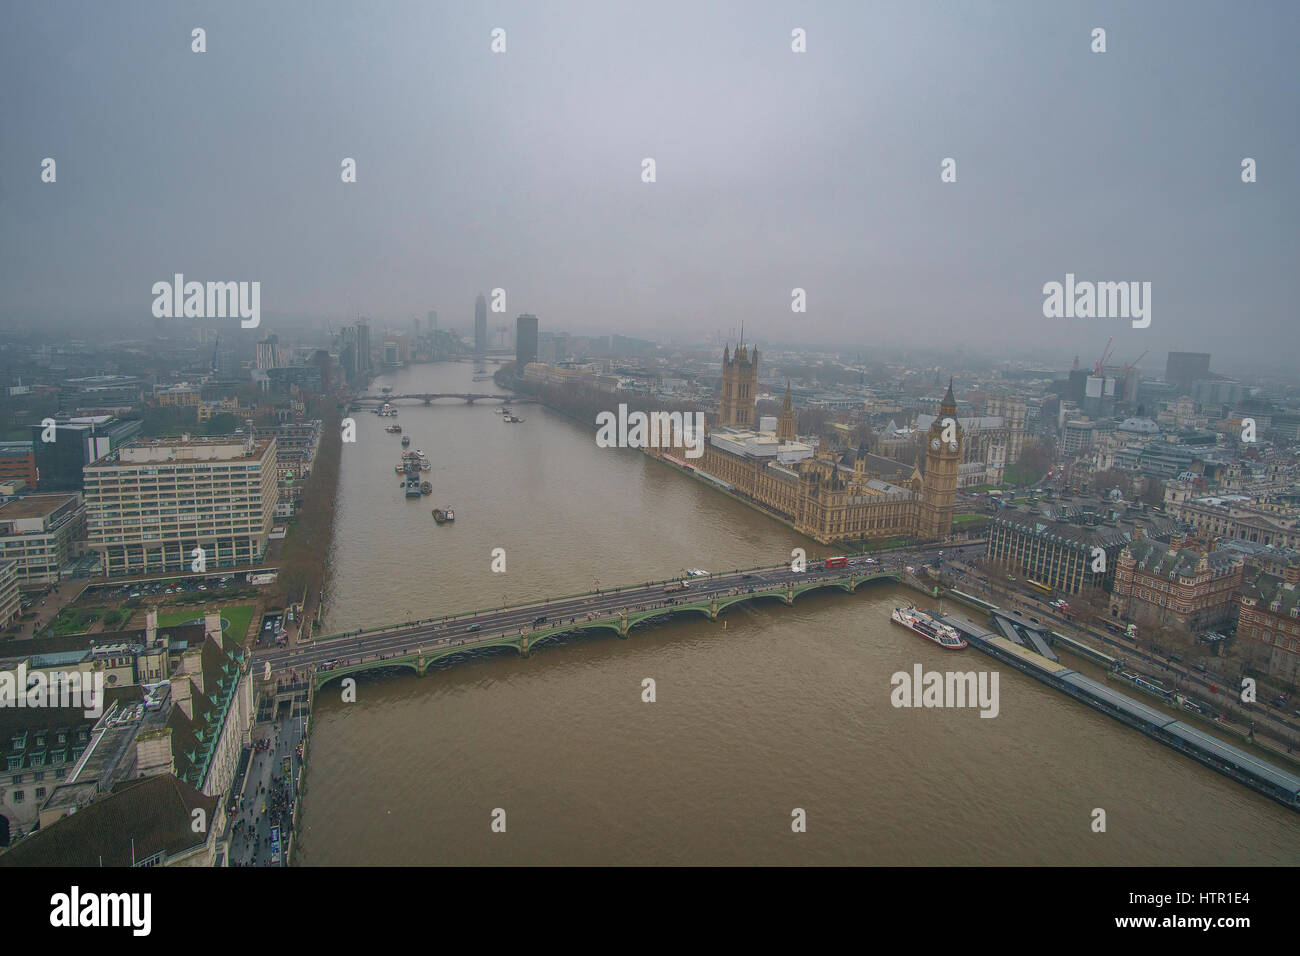 Panoramic Aerial view of Thames river in London against a cloudy sky in a foggy weather. London, United Kingdom. Stock Photo